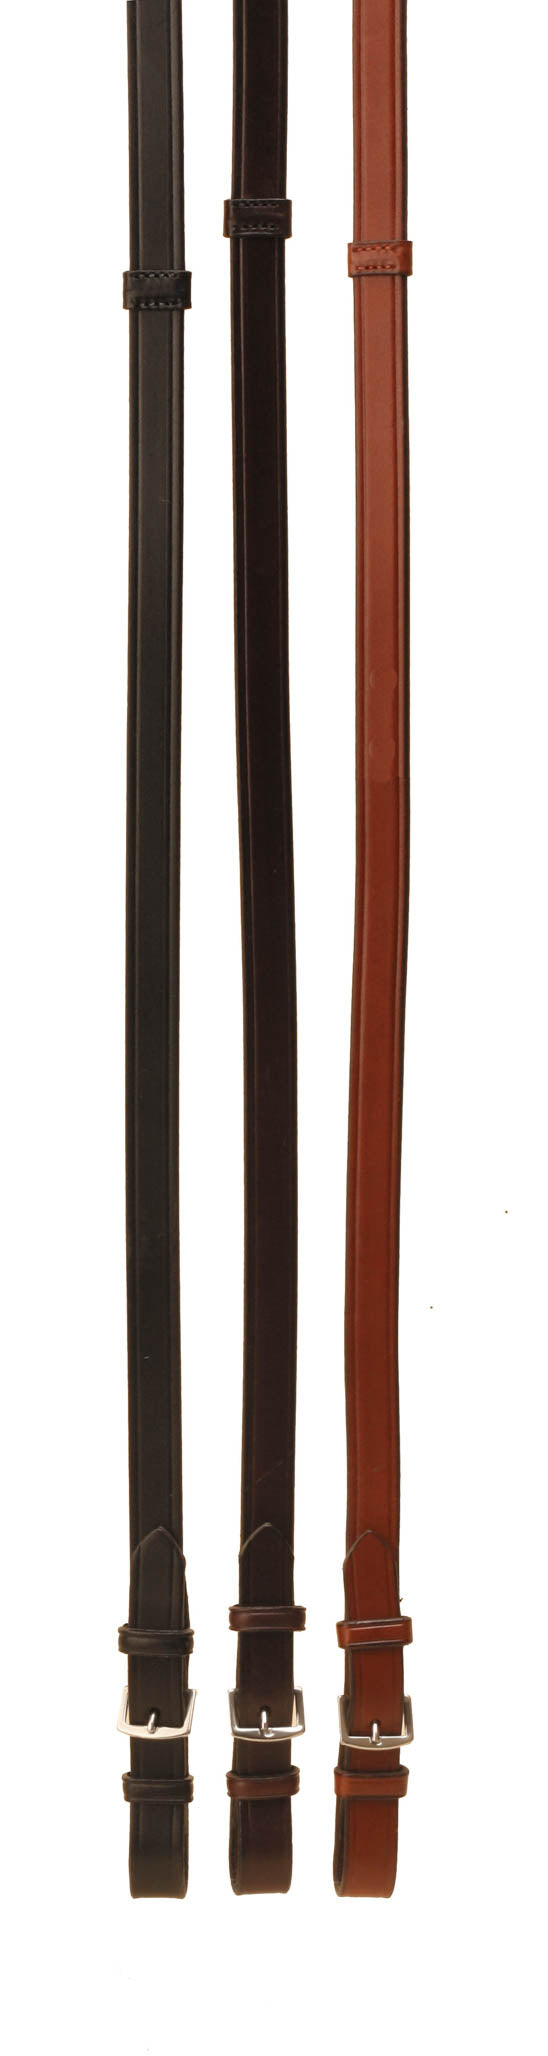 Tory Leather Dressage Reins with Stops